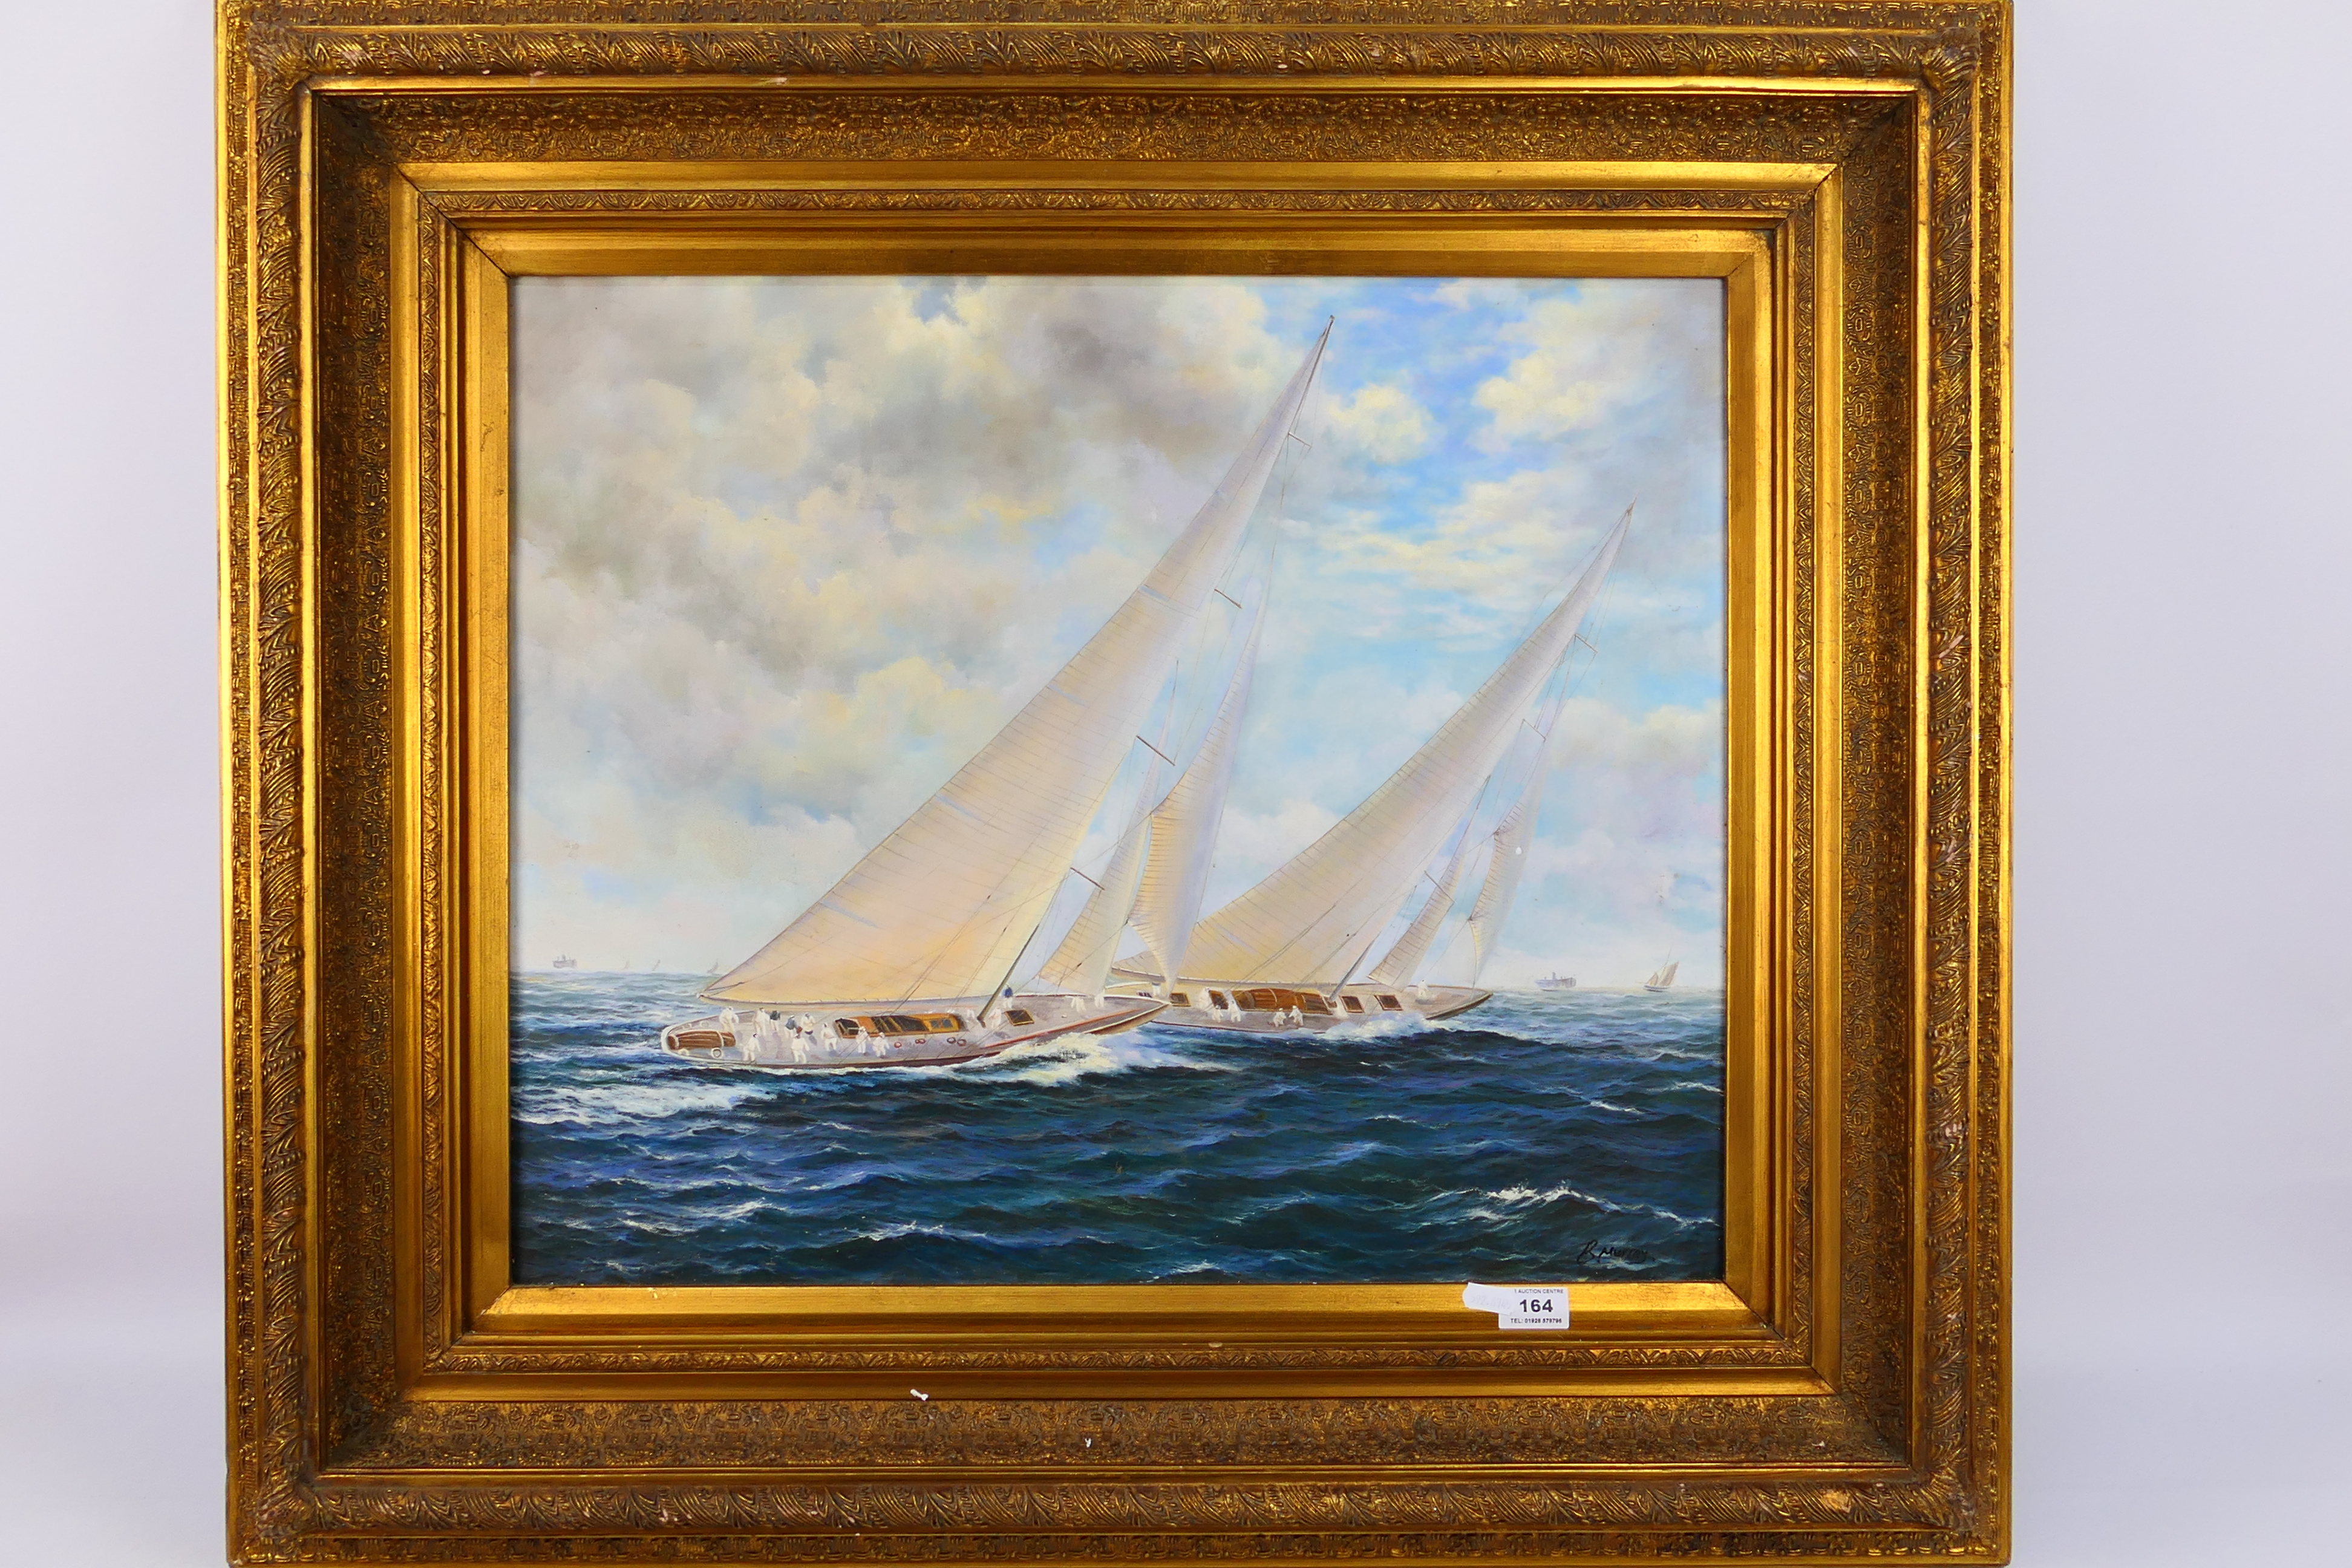 A 20th century oil on canvas seascape, depicting two racing yachts at sail,